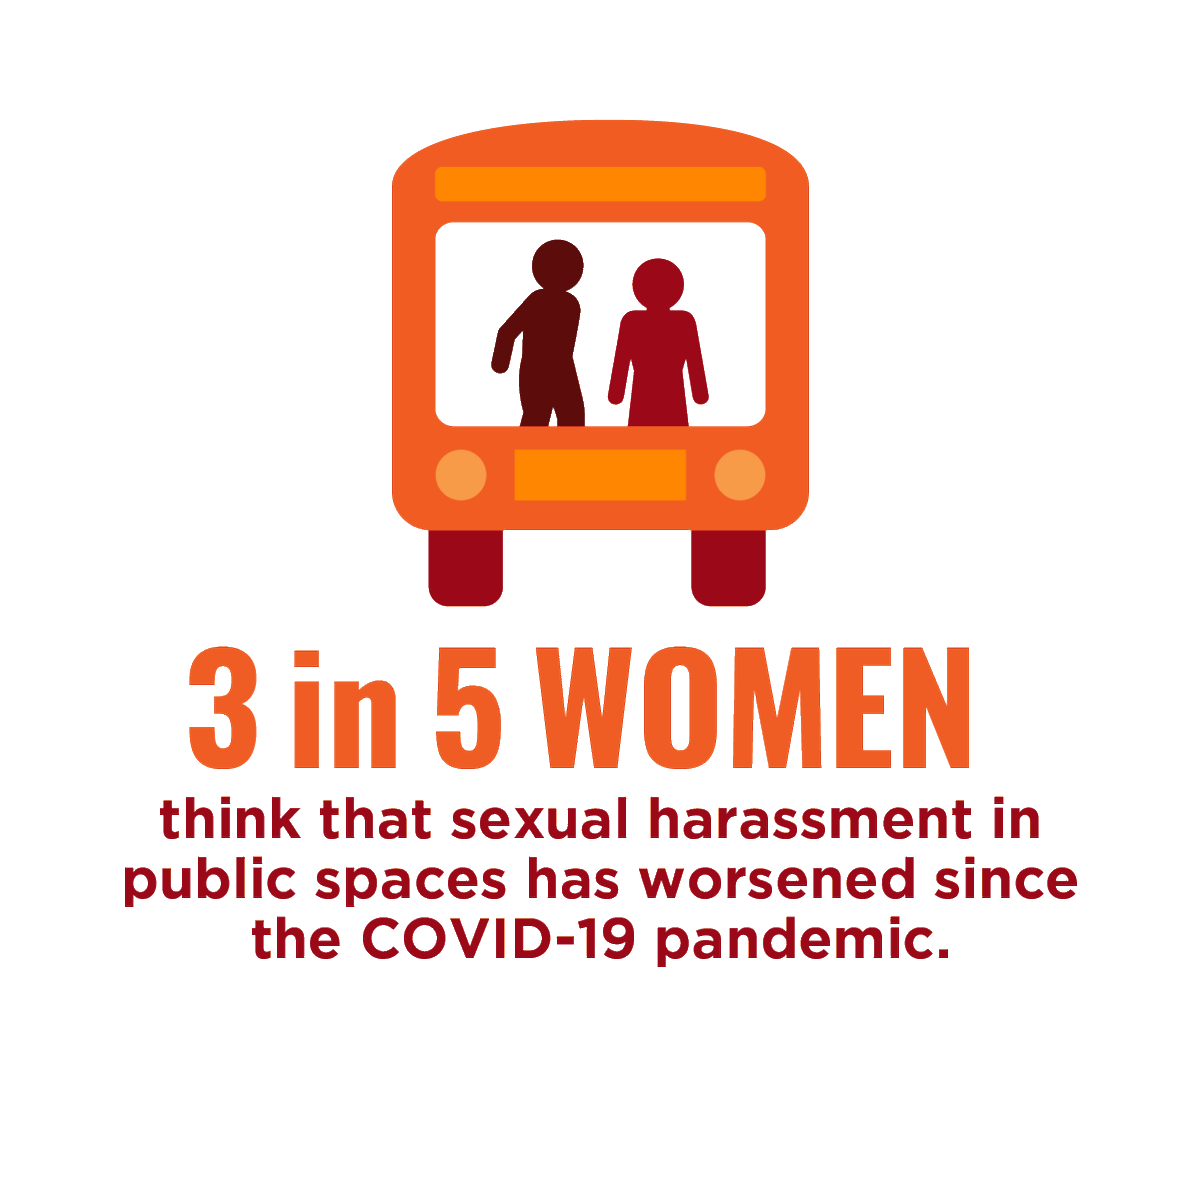 Violence against women in public spaces remains a key deterrent to women’s mobility during COVID-19. It limits their access to employment, essential services, and recreational activities. It also negatively impacts their health and well-being. #EndGBV